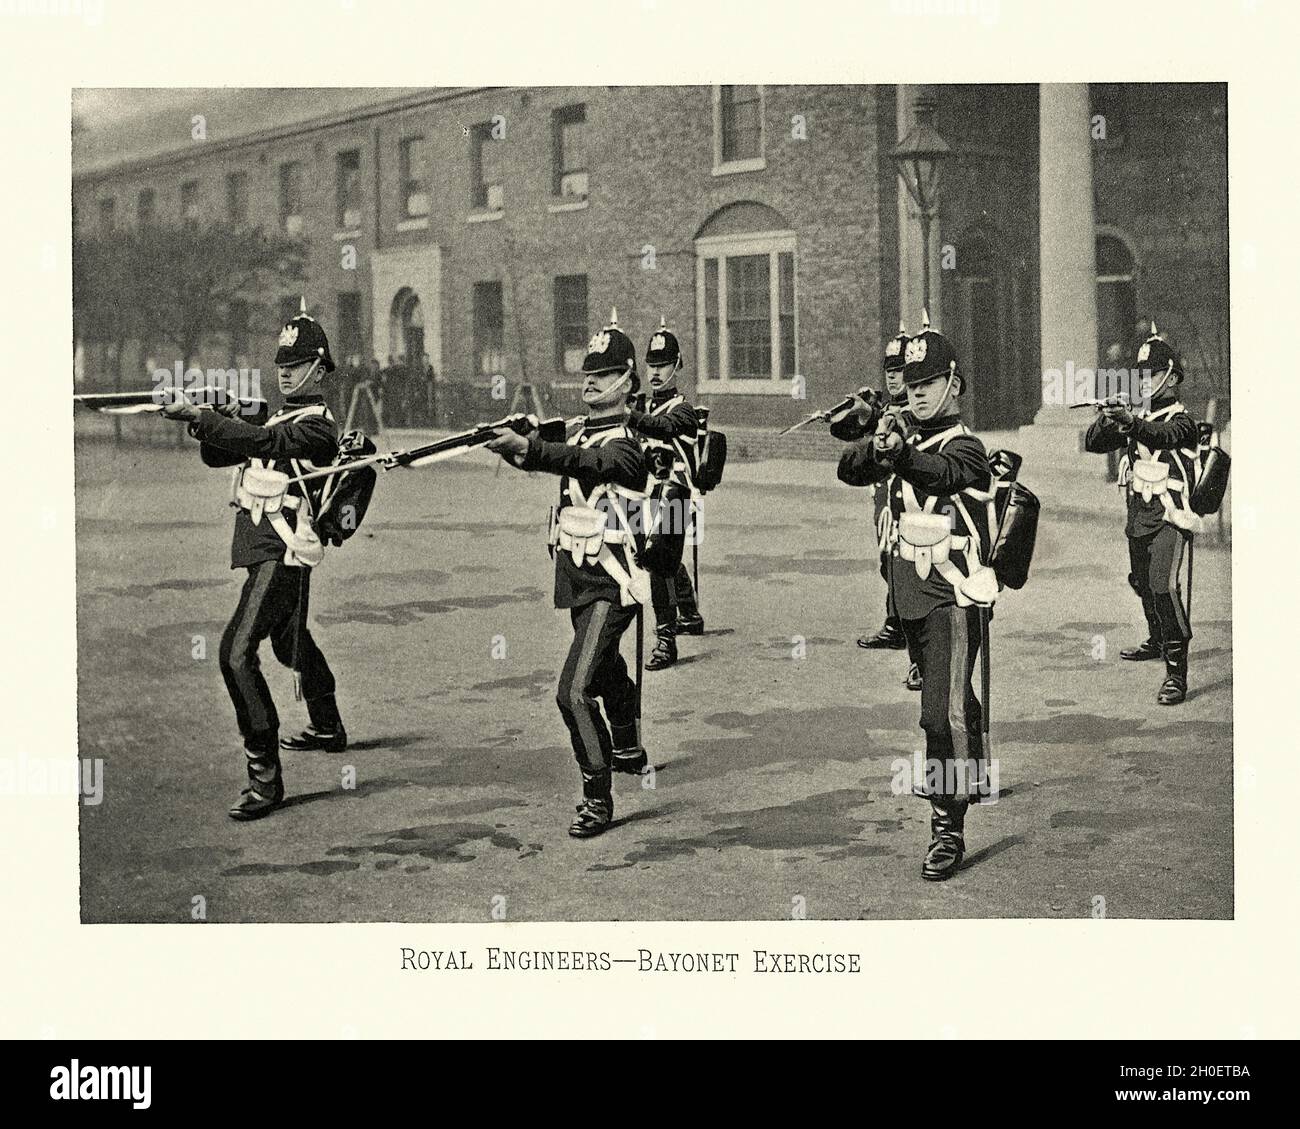 Vintage photogrtaph of Soldiers doing bayonet exercise, British army Royal Engineers, Military uniform, Victorian 19th Century Stock Photo